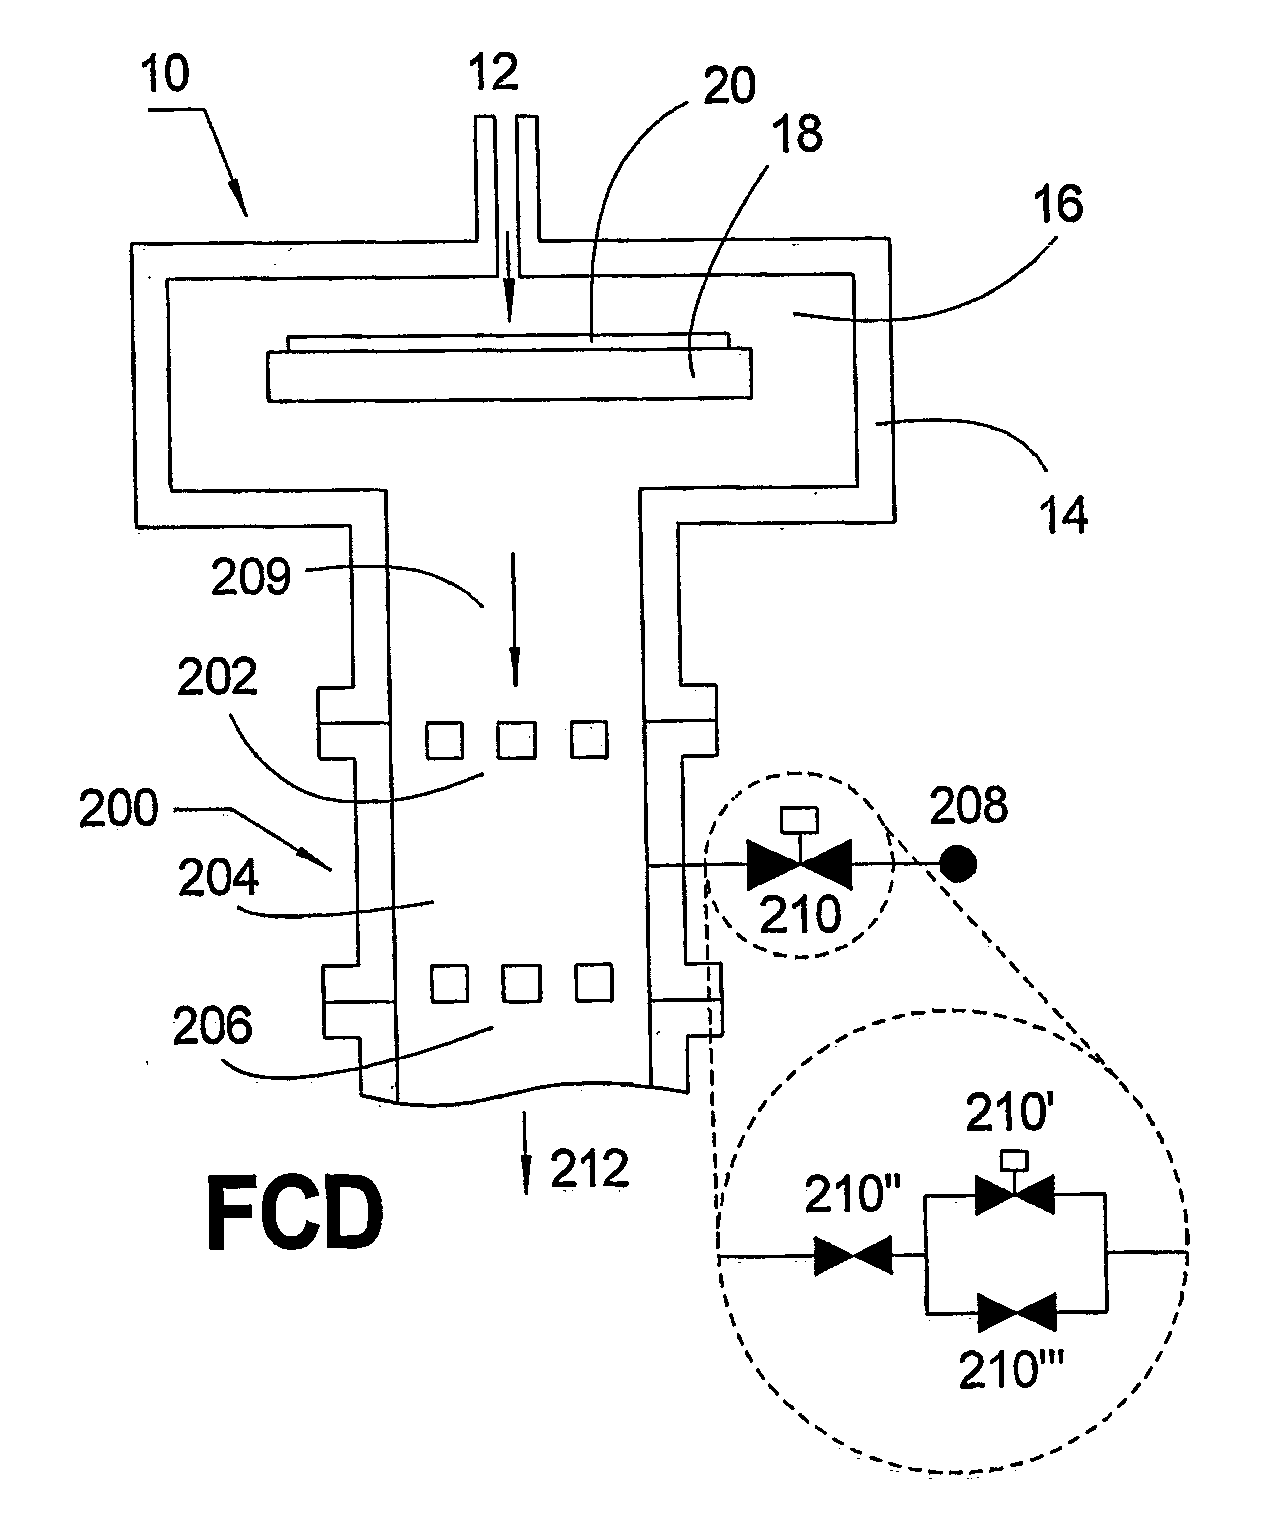 Apparatus and method for downstream pressure control and sub-atmospheric reactive gas abatement